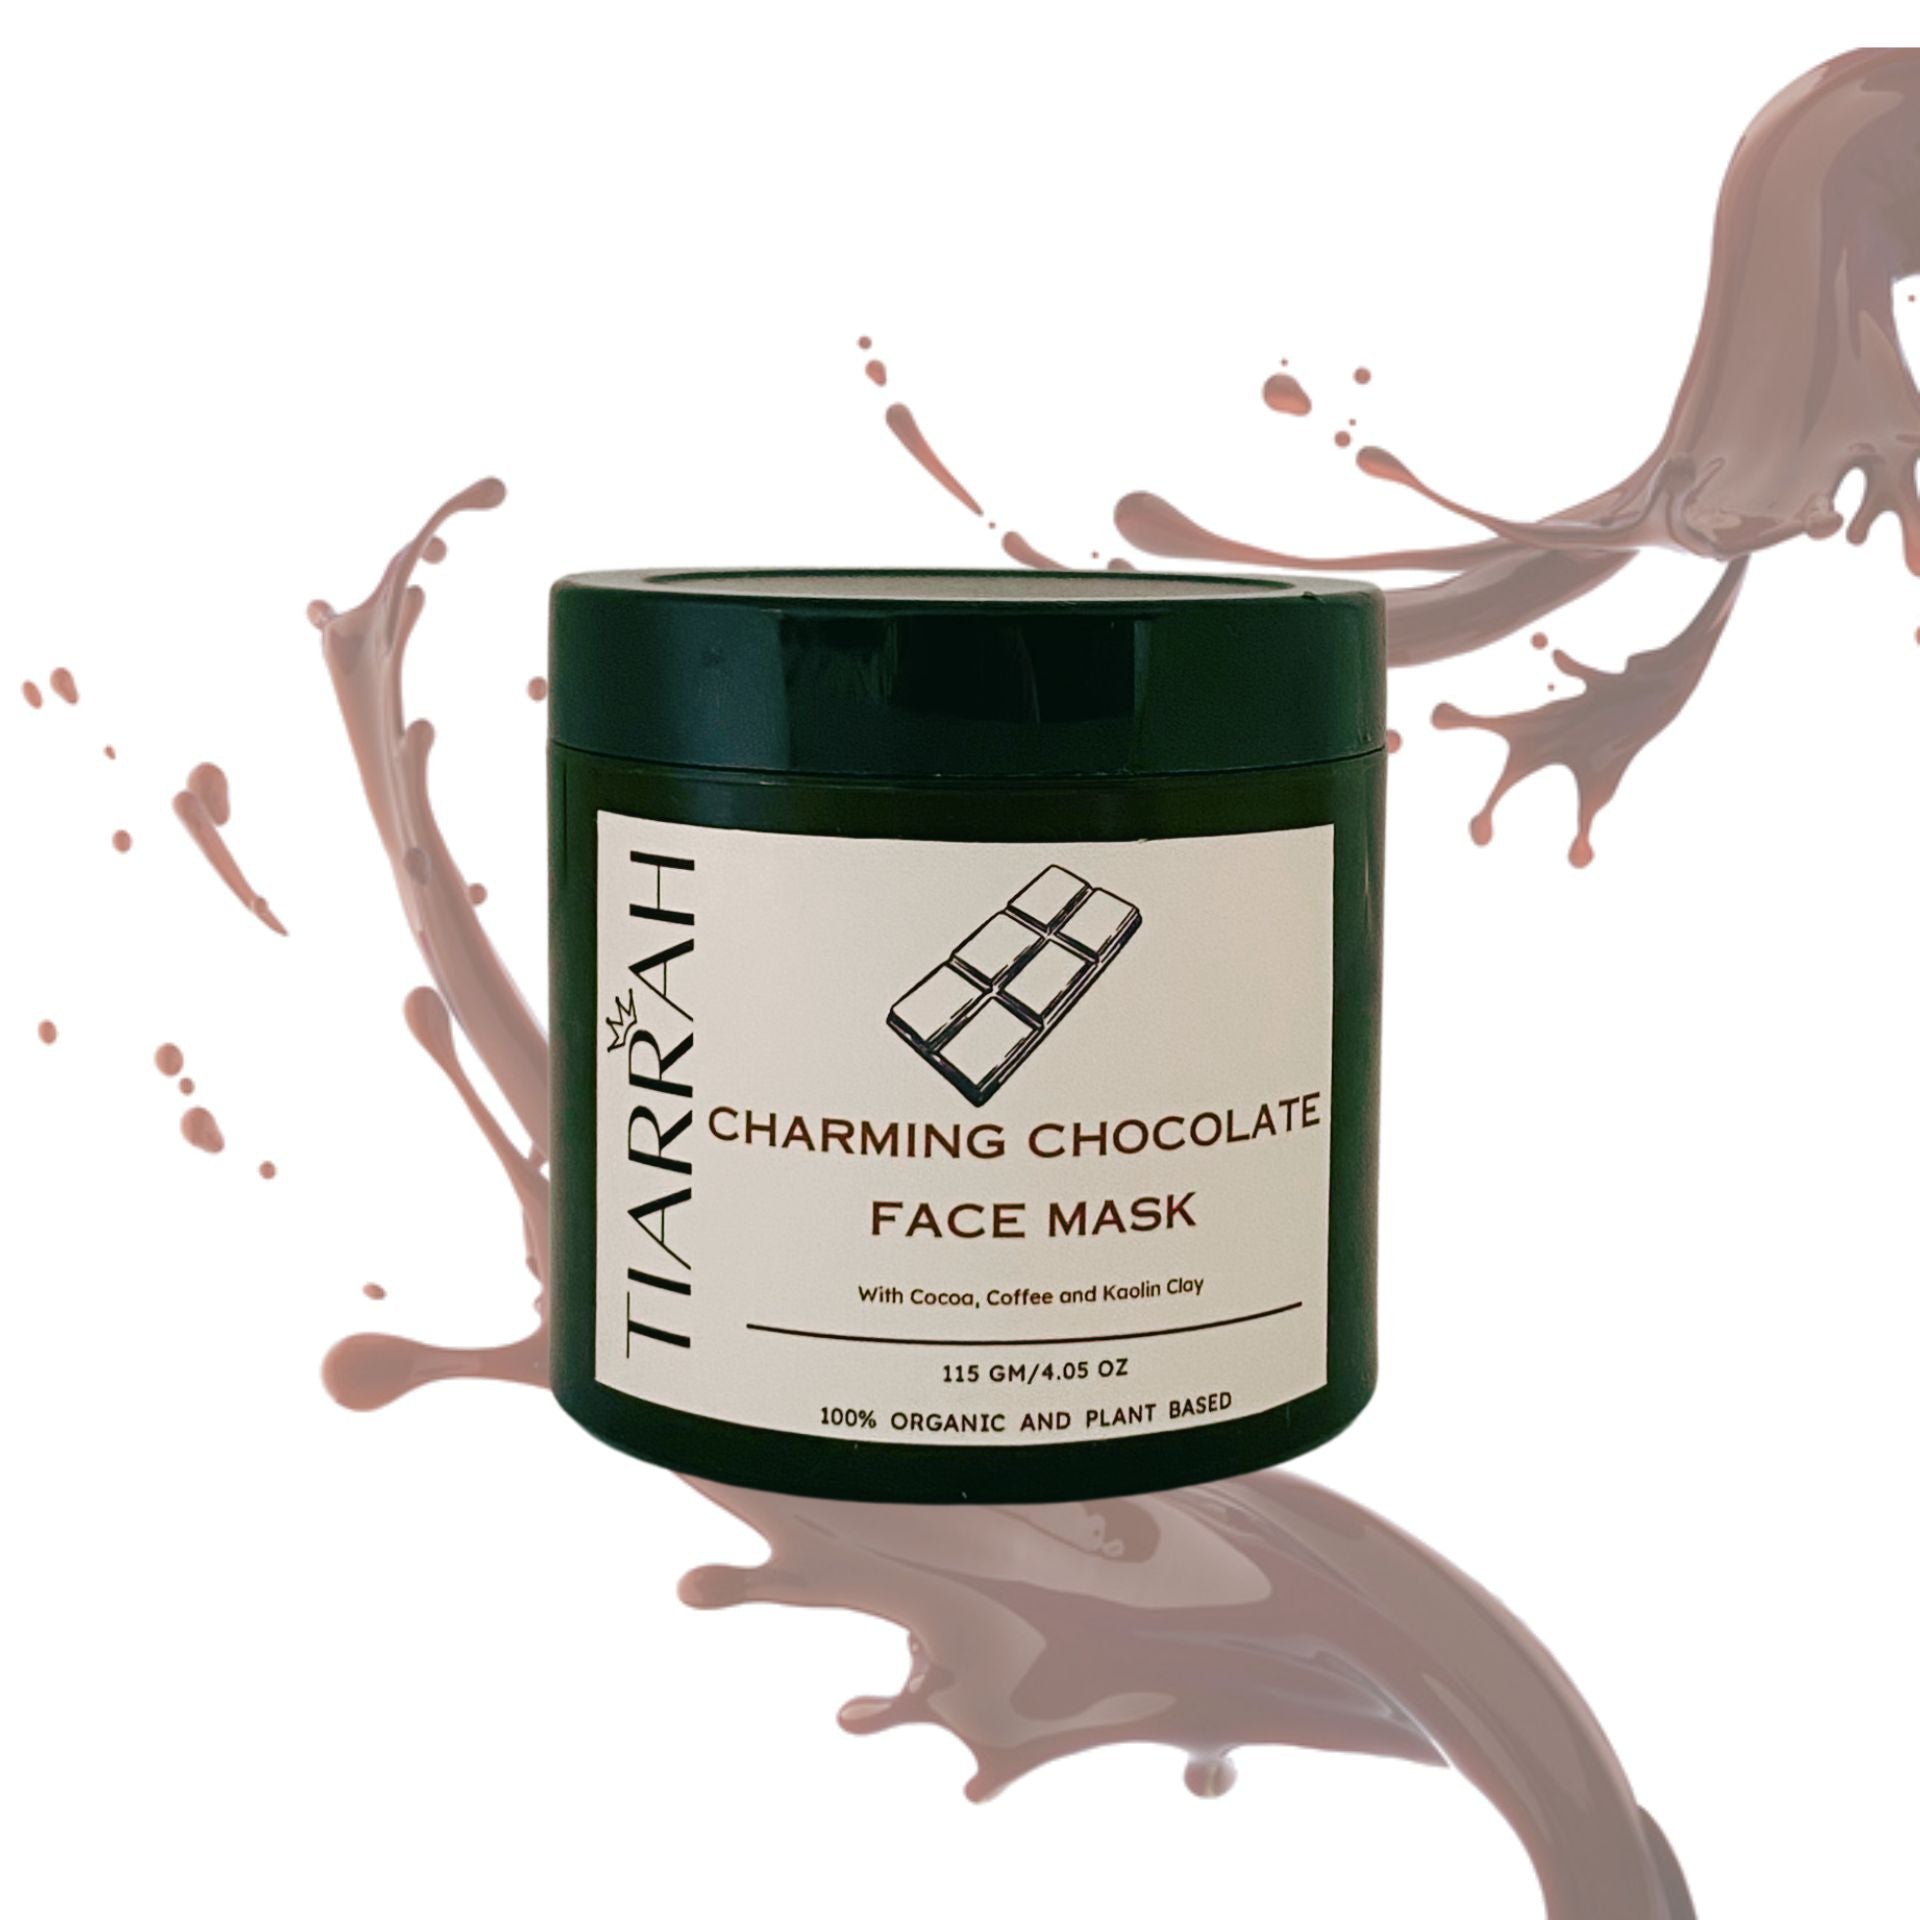 Tiarrah Chocolate Face Mask: Natural, Organic, Non-Toxic - The Luxury Bath and Body Care Shop